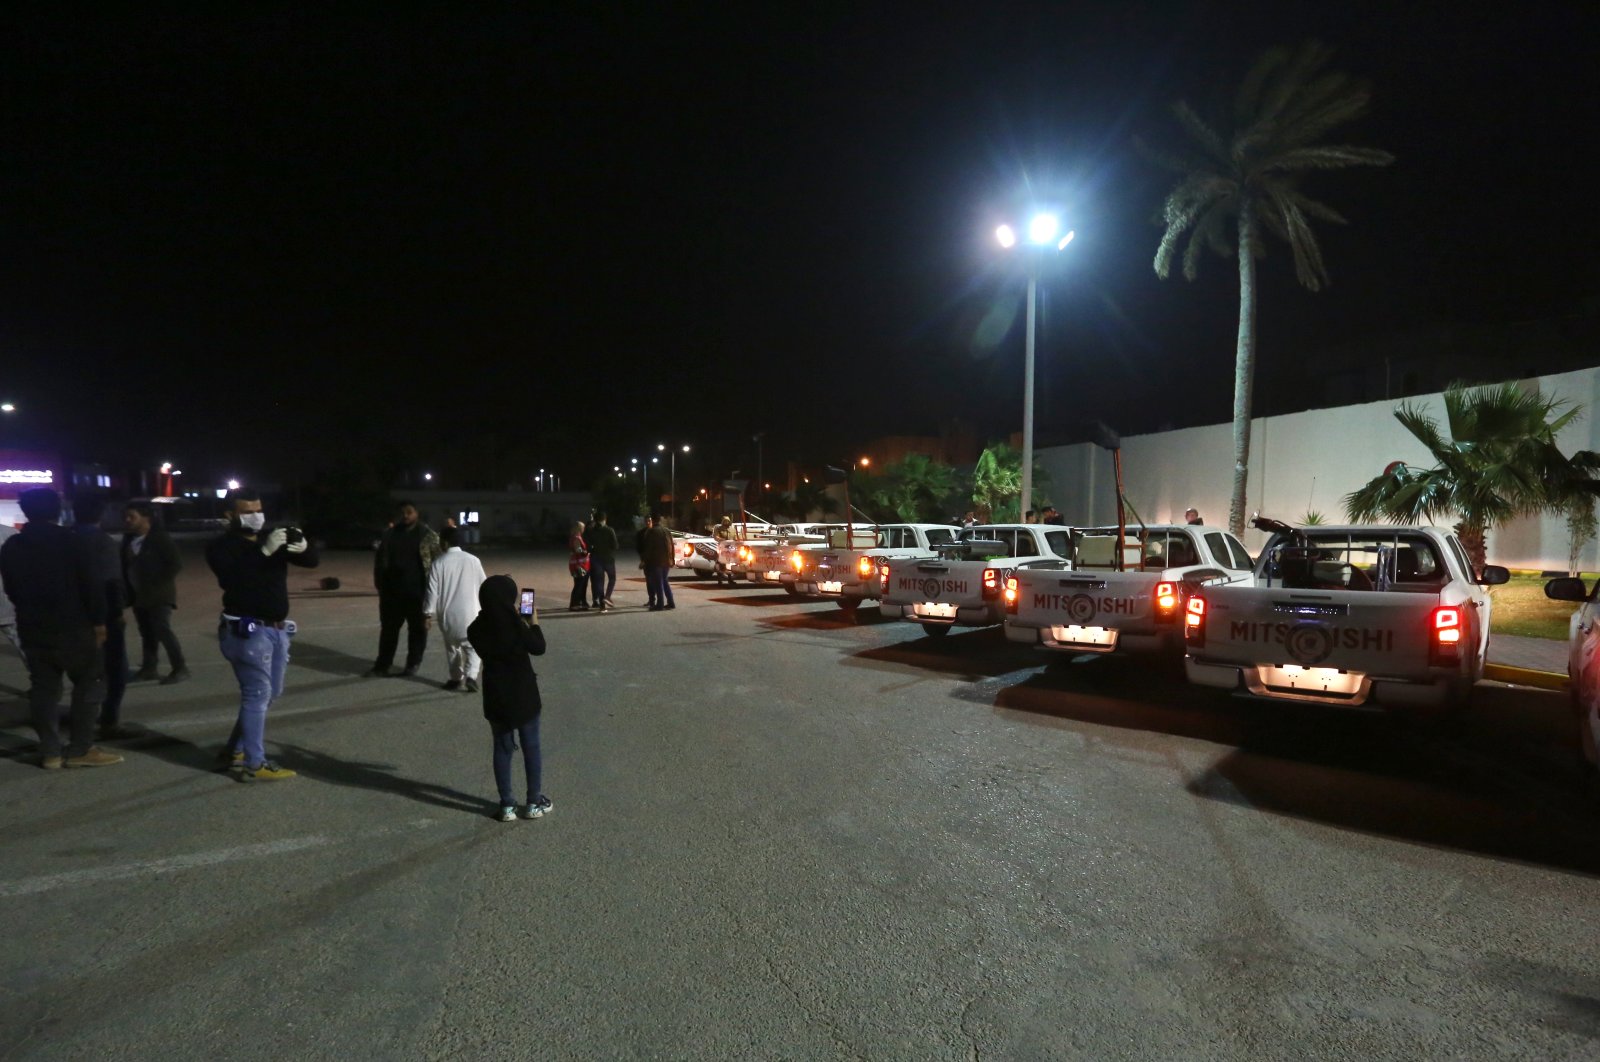 Libya's internationally recognized Government of National Accord in Tripoli has ordered a curfew from 6 p.m. to 6 a.m. to help prevent coronavirus infections, March 21, 2020 (AA Photo)